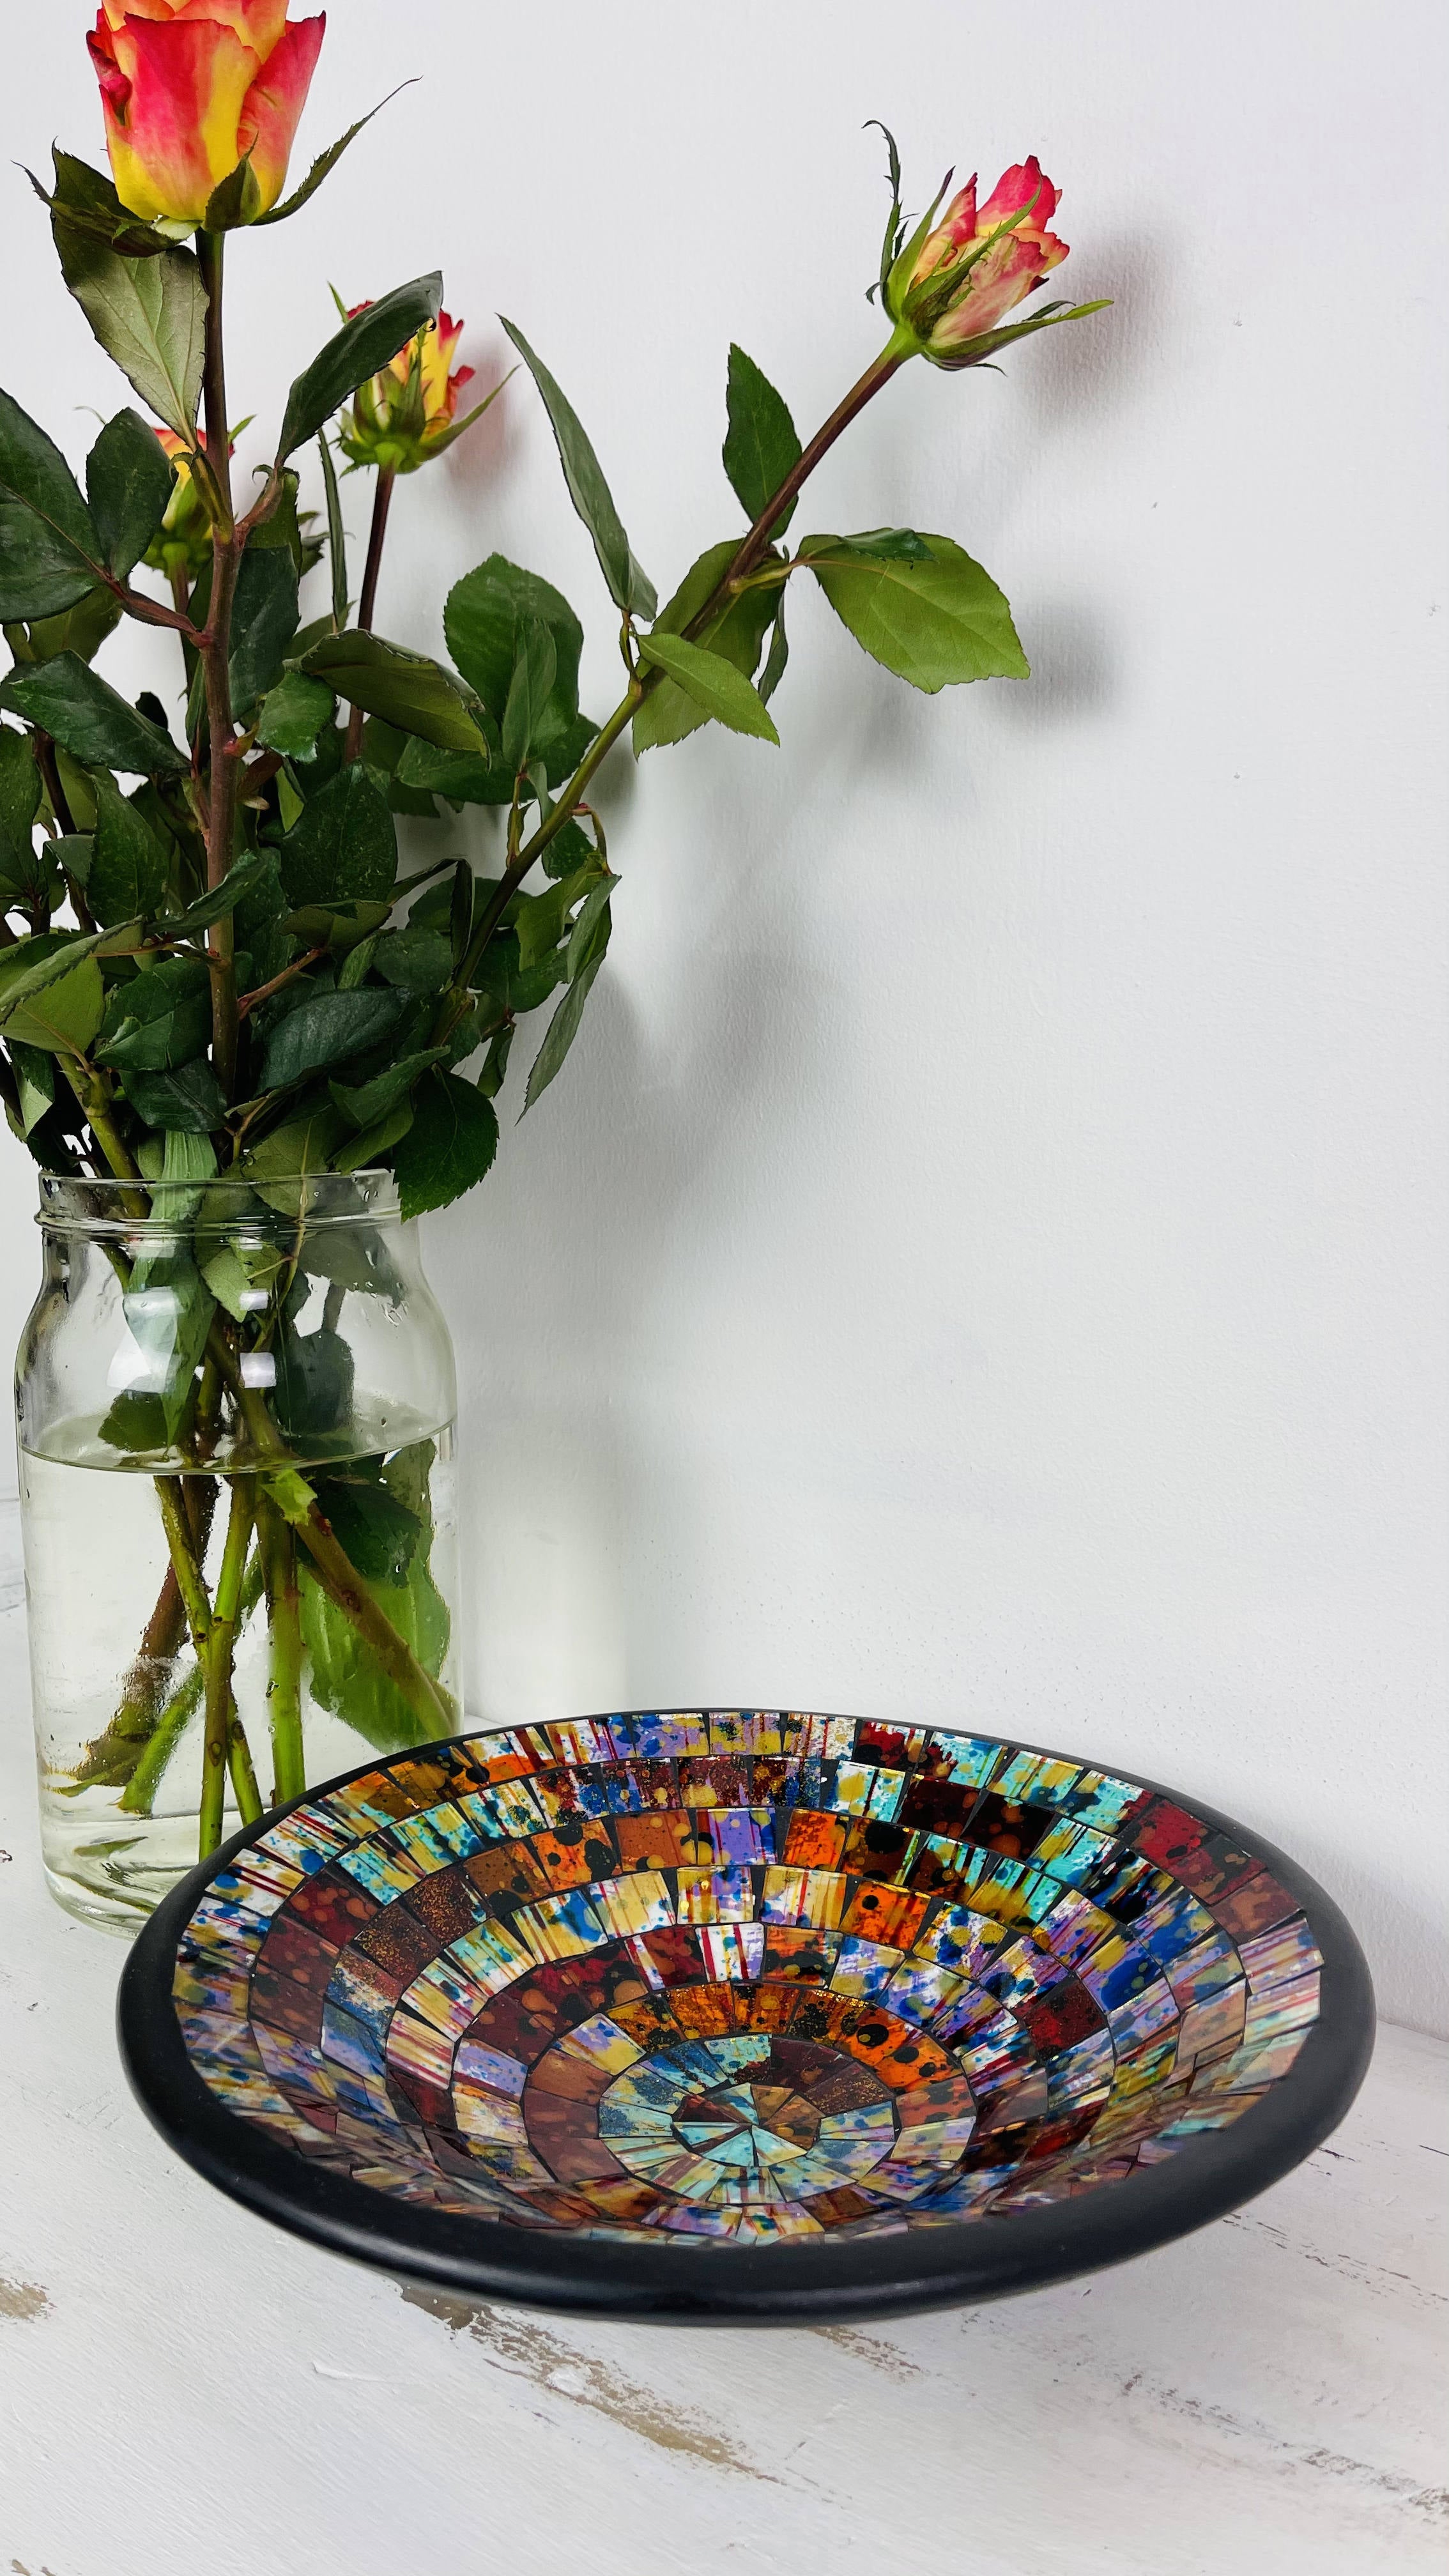 front view of mosaic bowl next to a vase of flowers